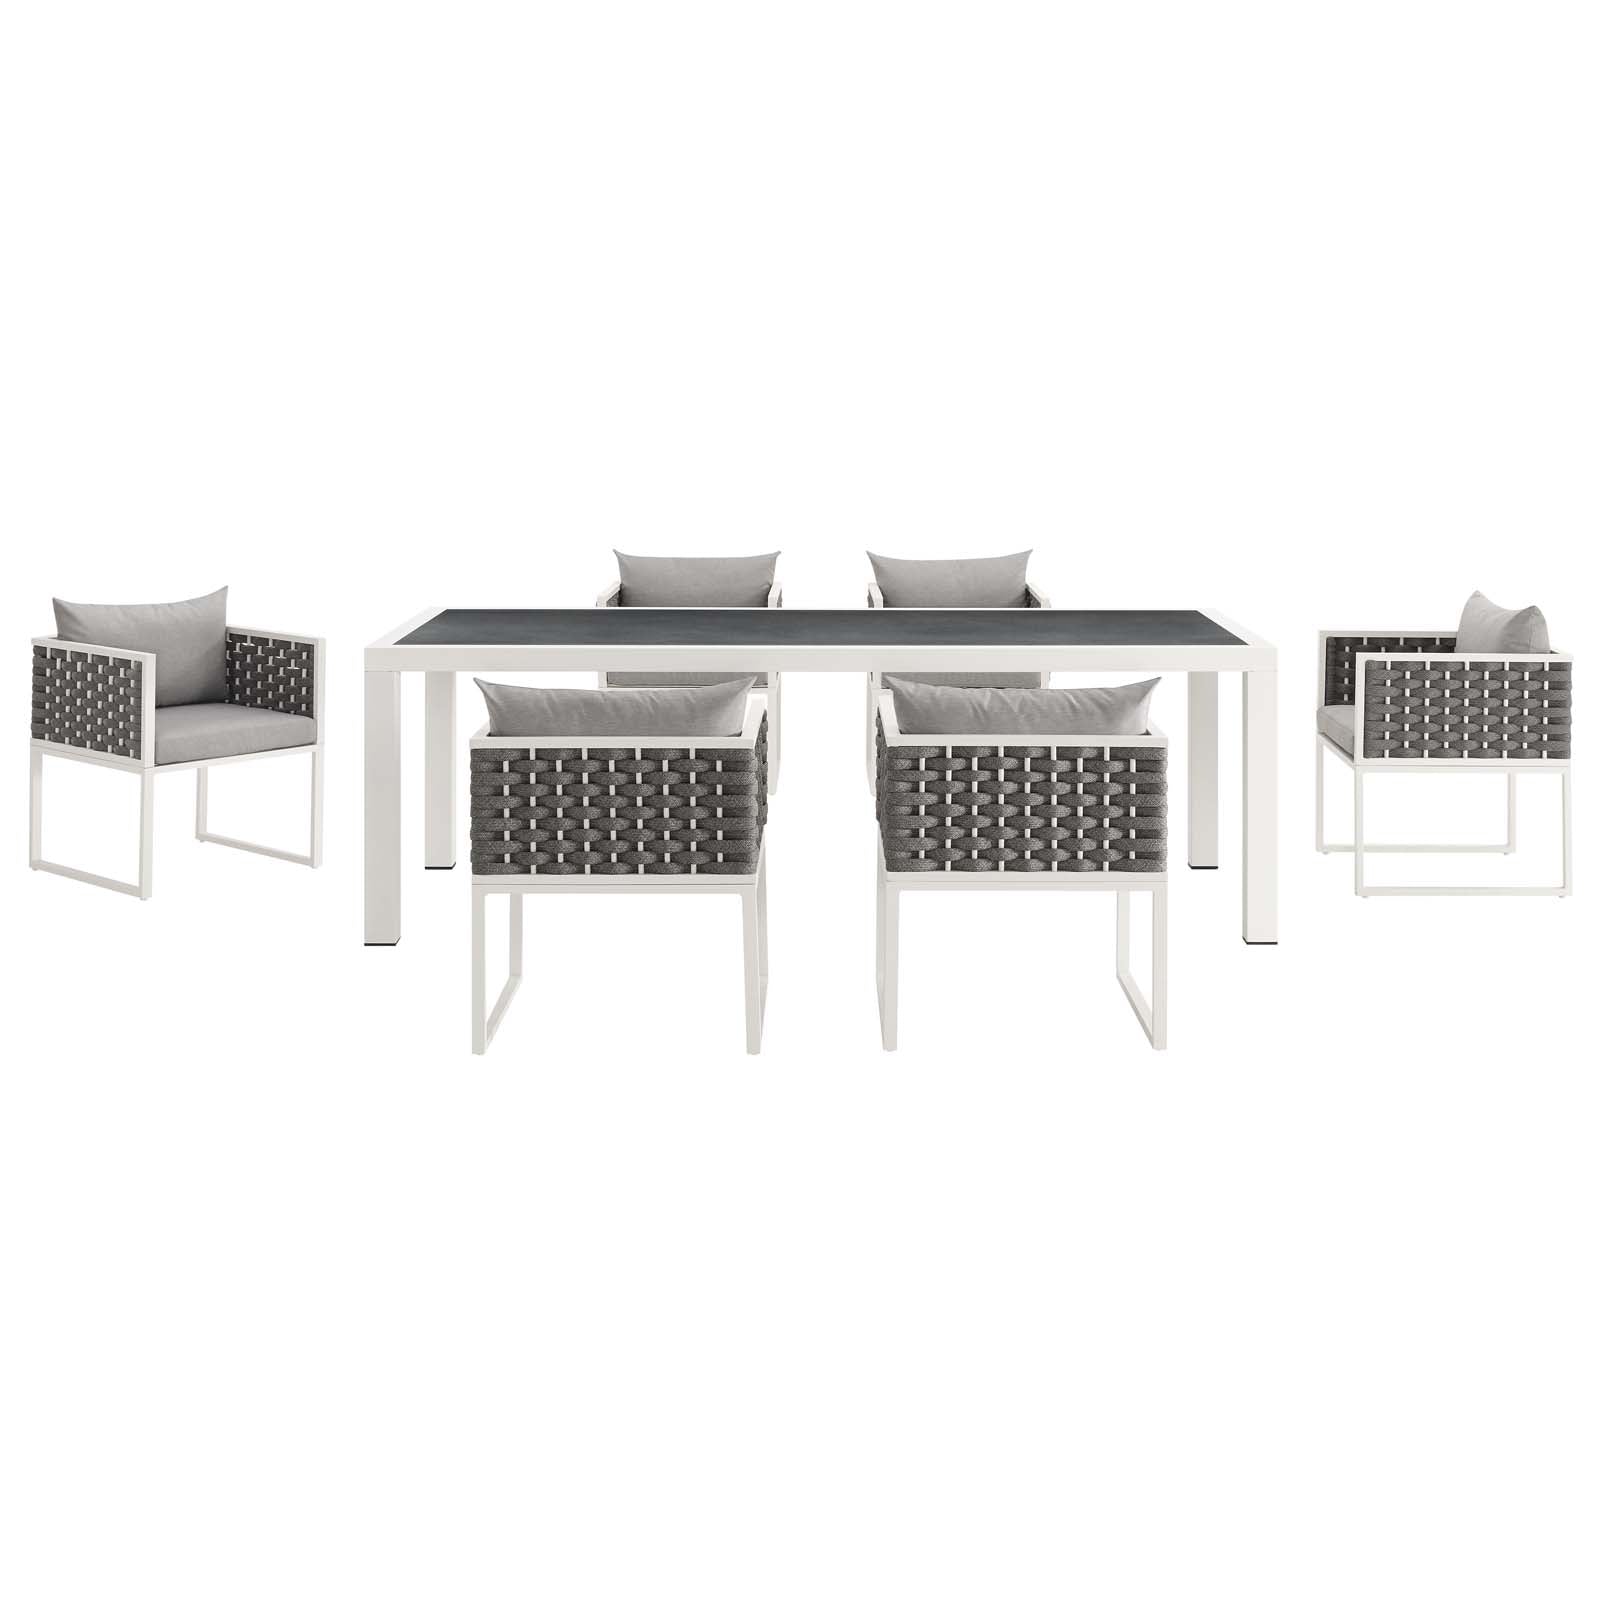 Stance 7 Piece Outdoor Patio Aluminum Dining Set - East Shore Modern Home Furnishings